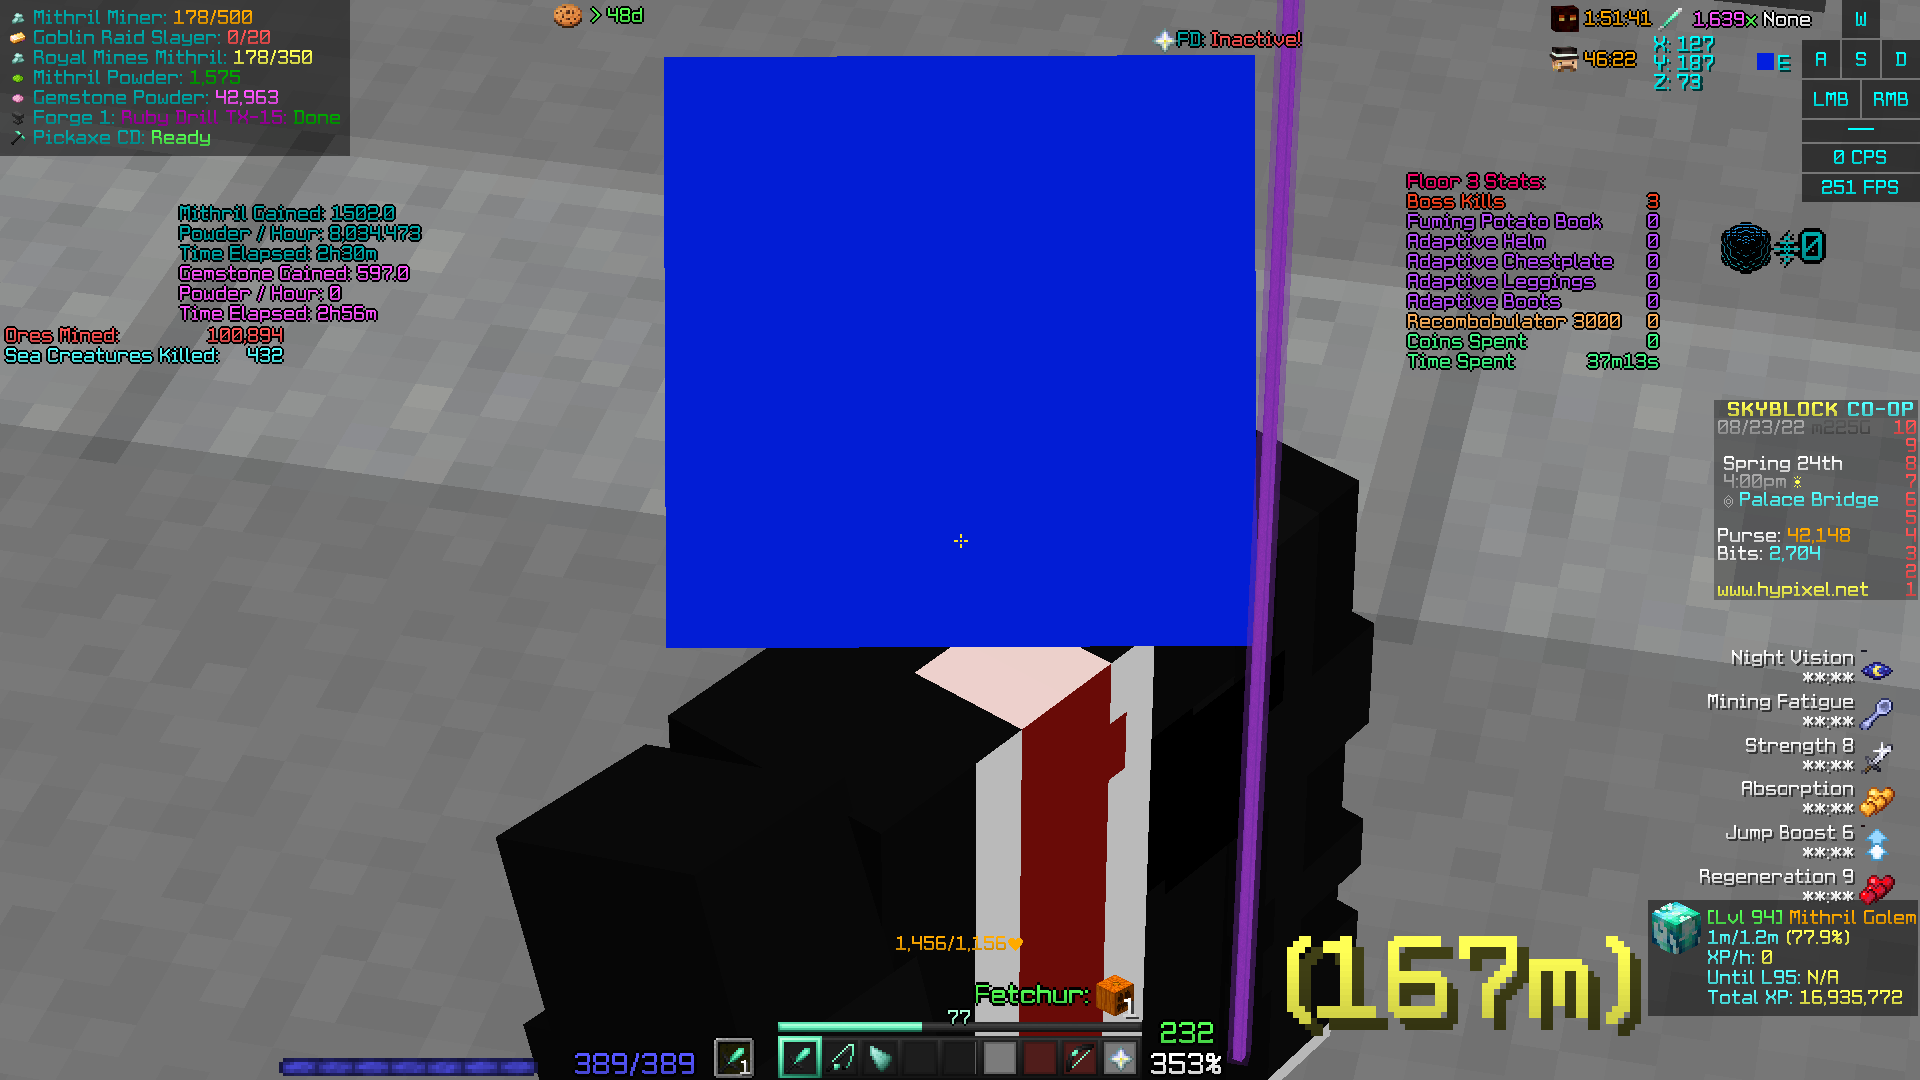 BrodfordLive's Profile Picture on PvPRP